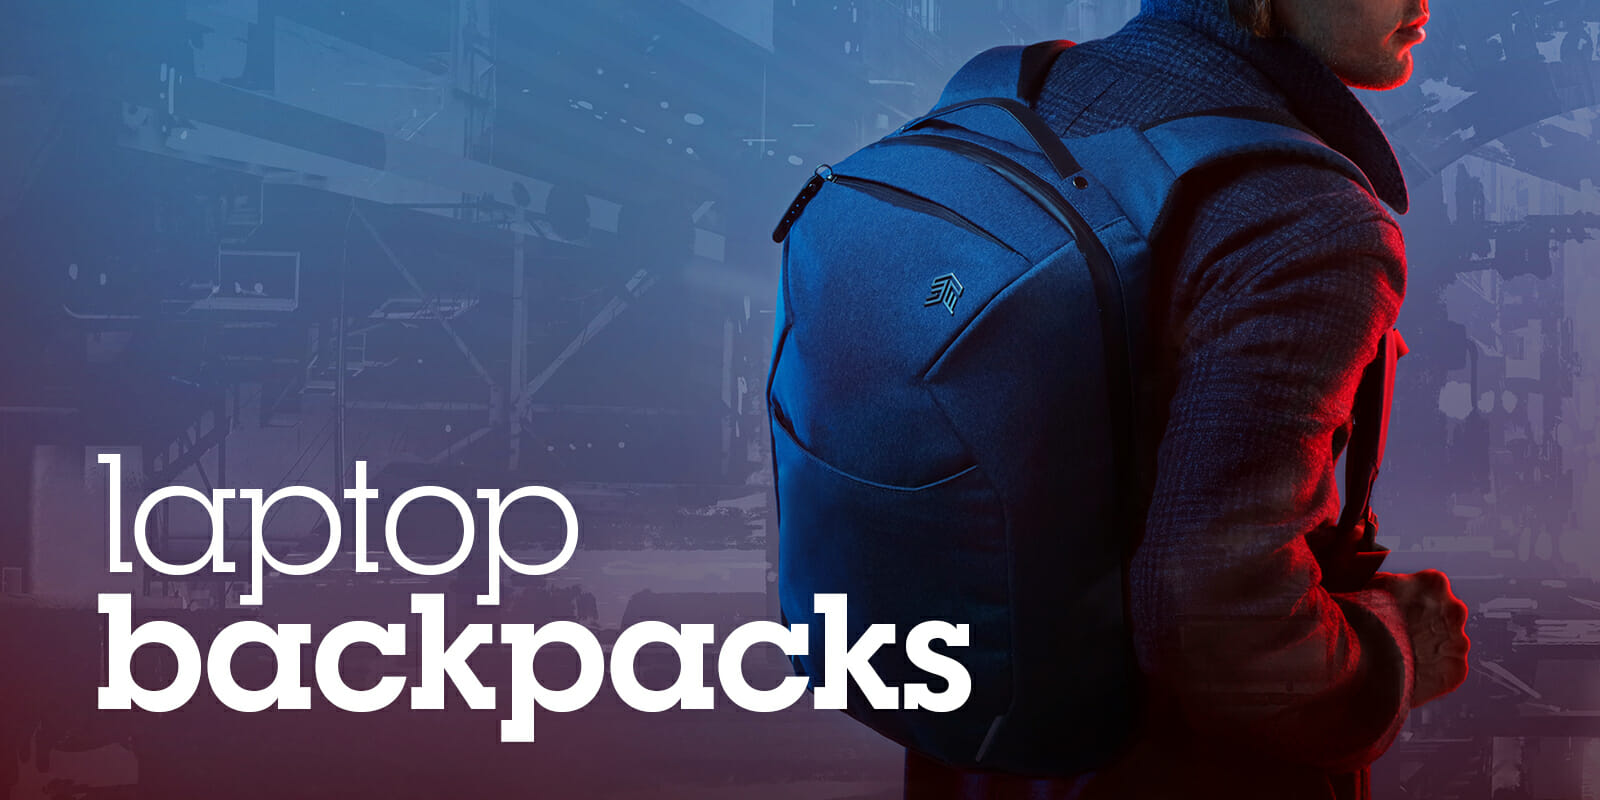 Laptop Backpack Market Report is a valuable source of knowledge for understanding world's main region market conditions